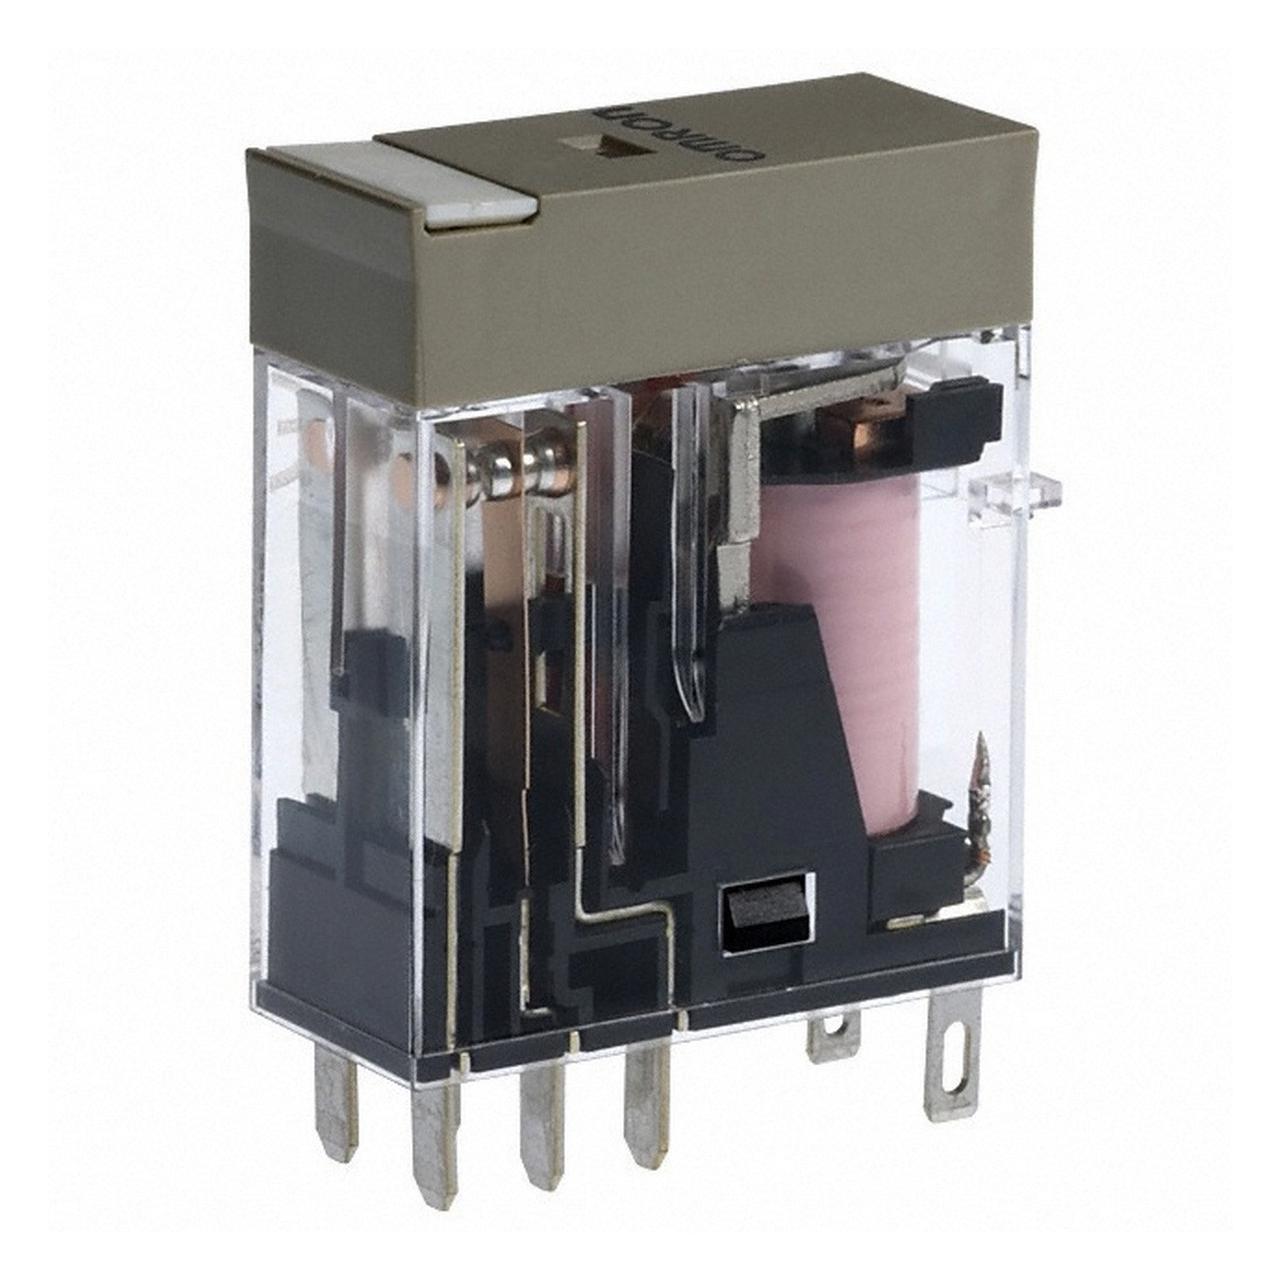 G2R-2-S 24VAC (S) POWER - GENERAL PURPOSE RELAYS OMRON